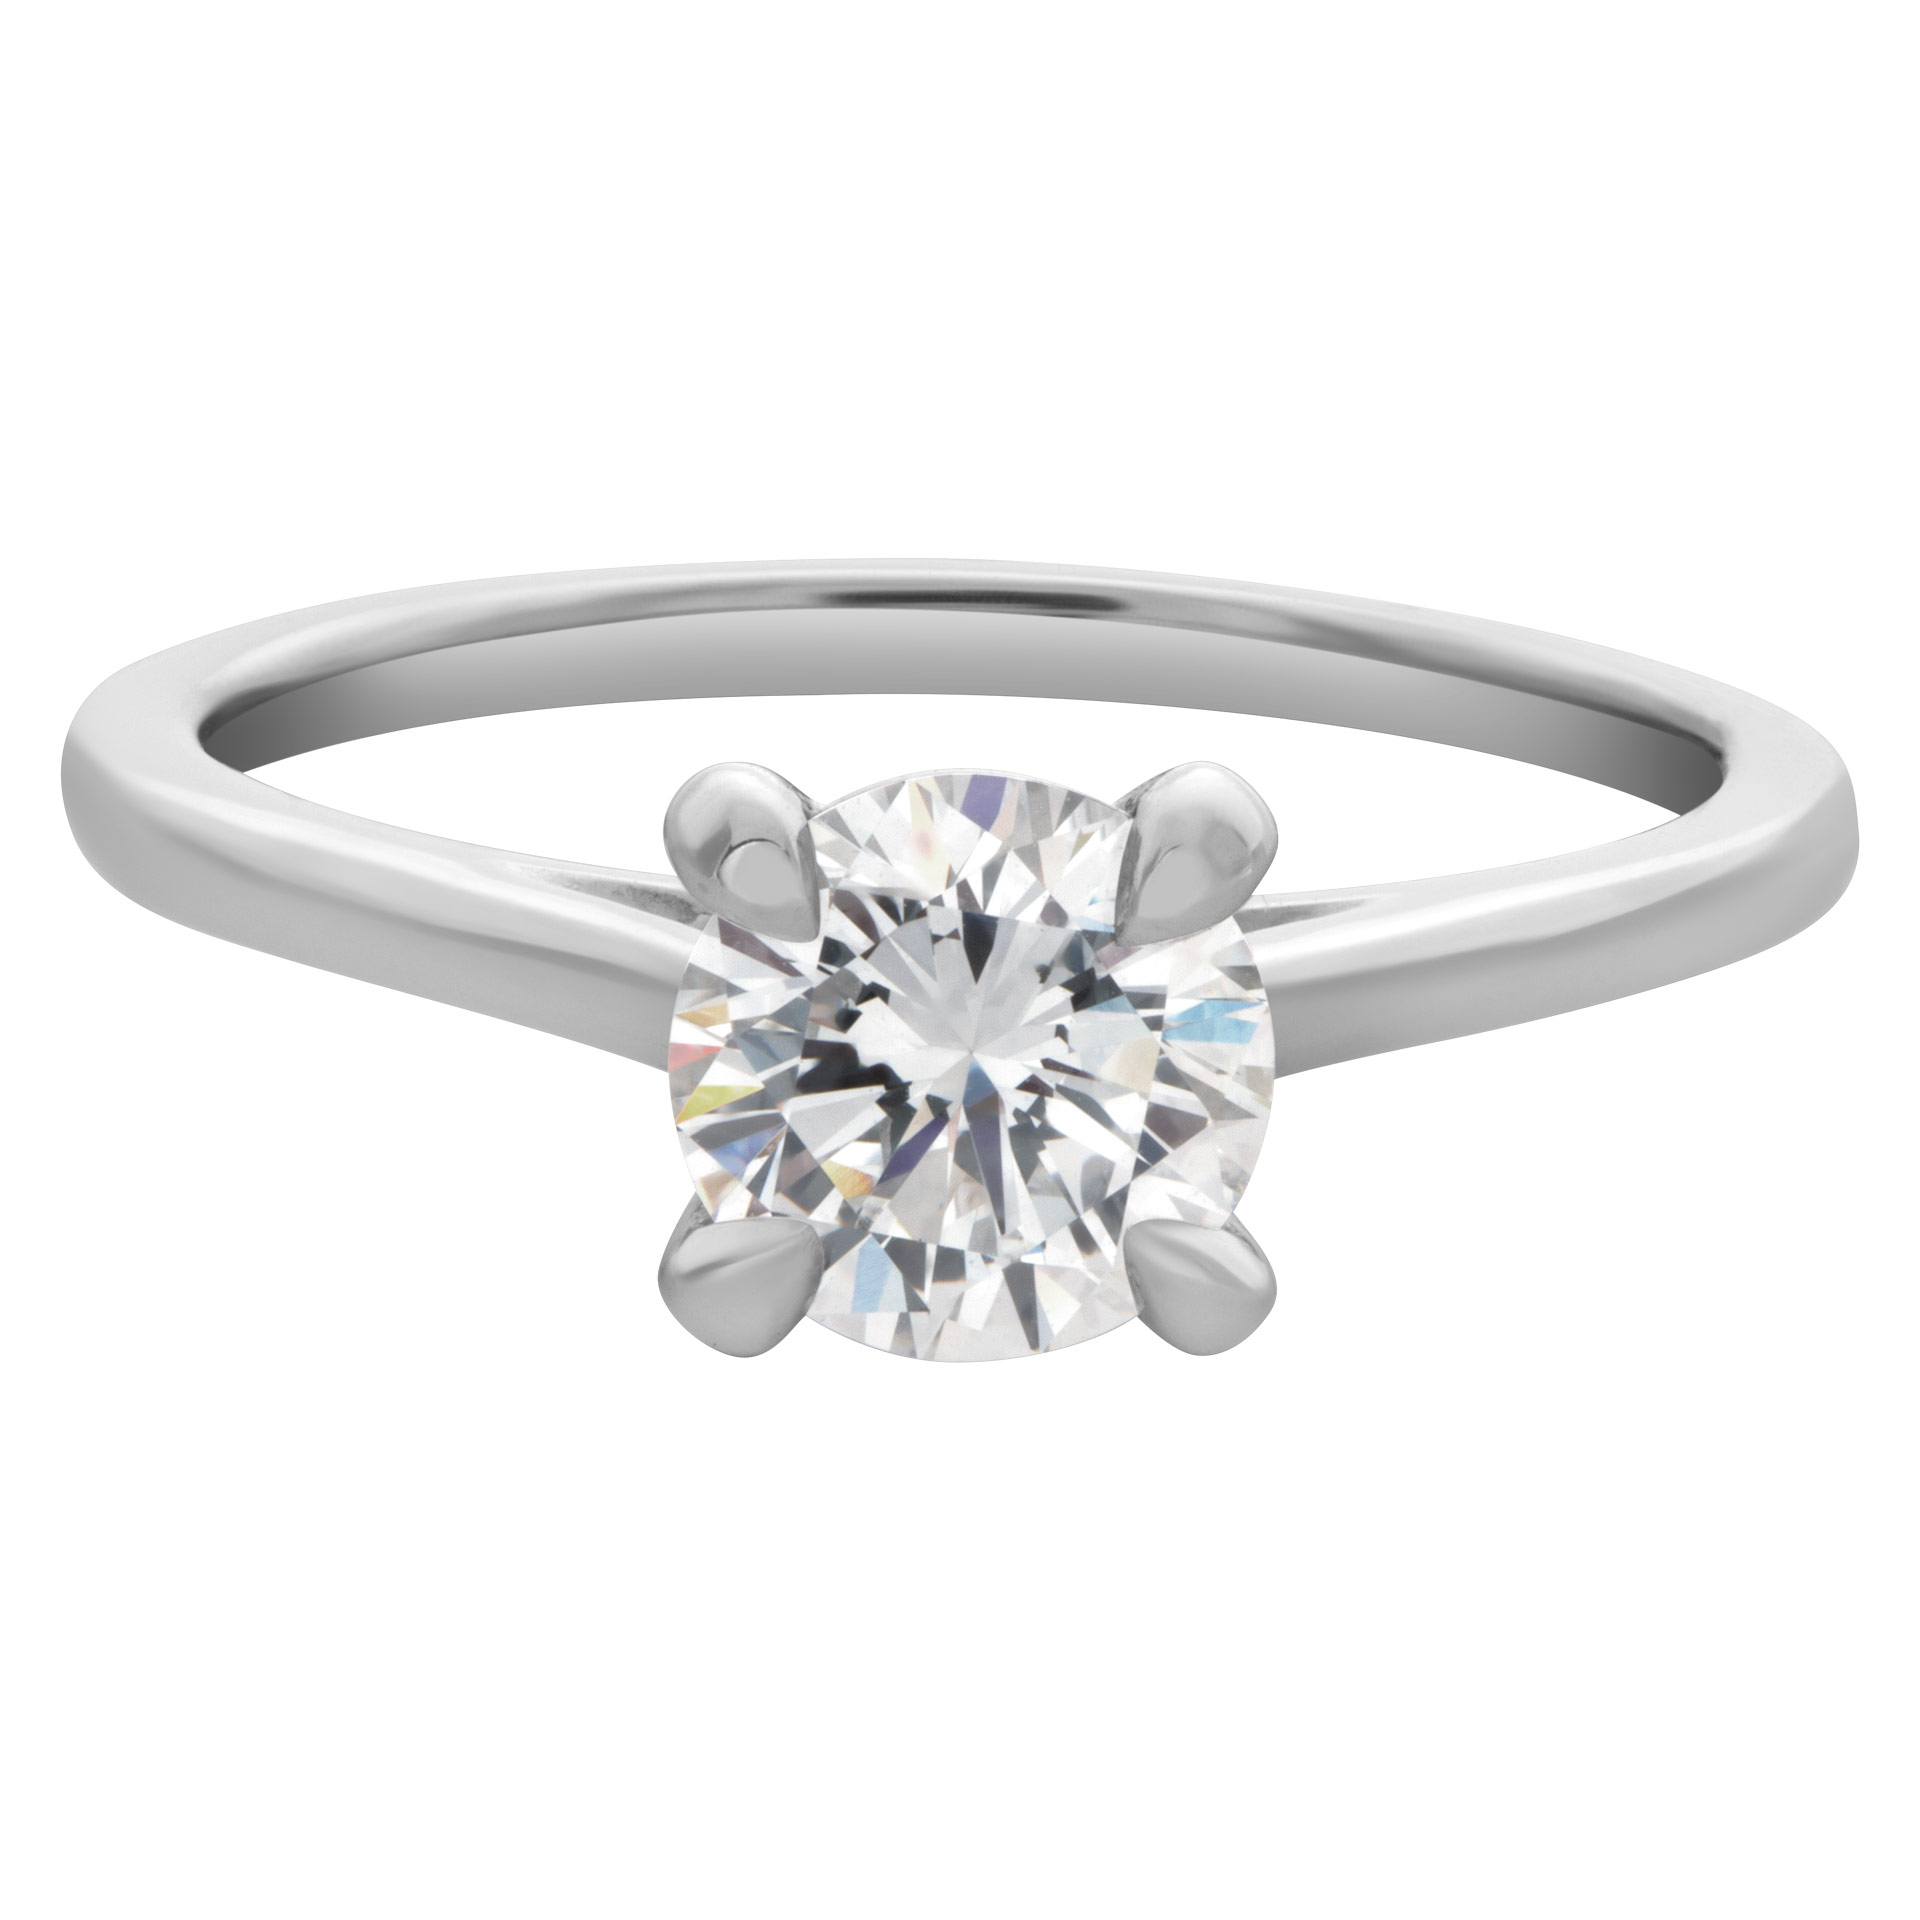 GIA certified round brilliant cut ring 1.01 carat  (E color, IF clarity) solitaire ring in 18k white gold